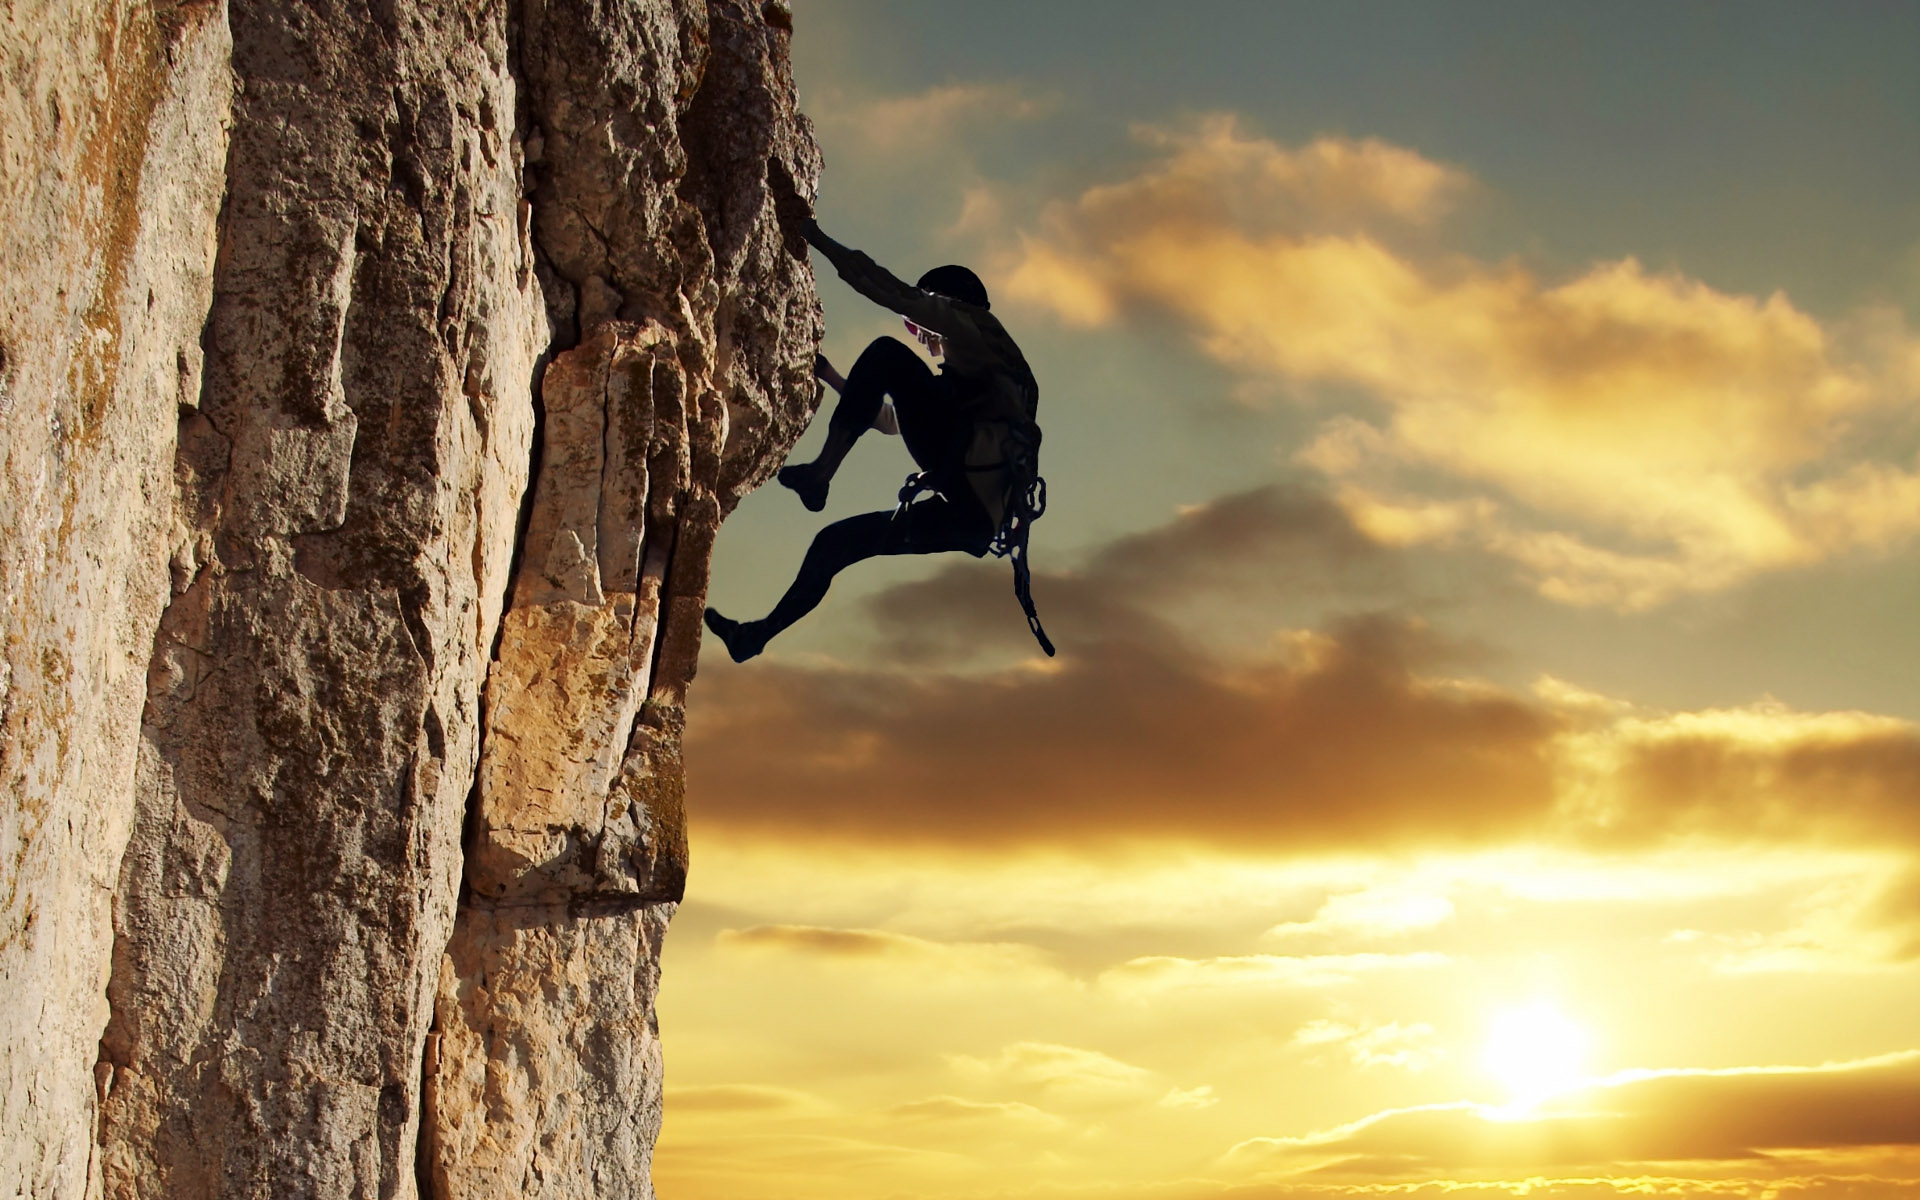 Climber at sunset - WALLPAPERS-HD